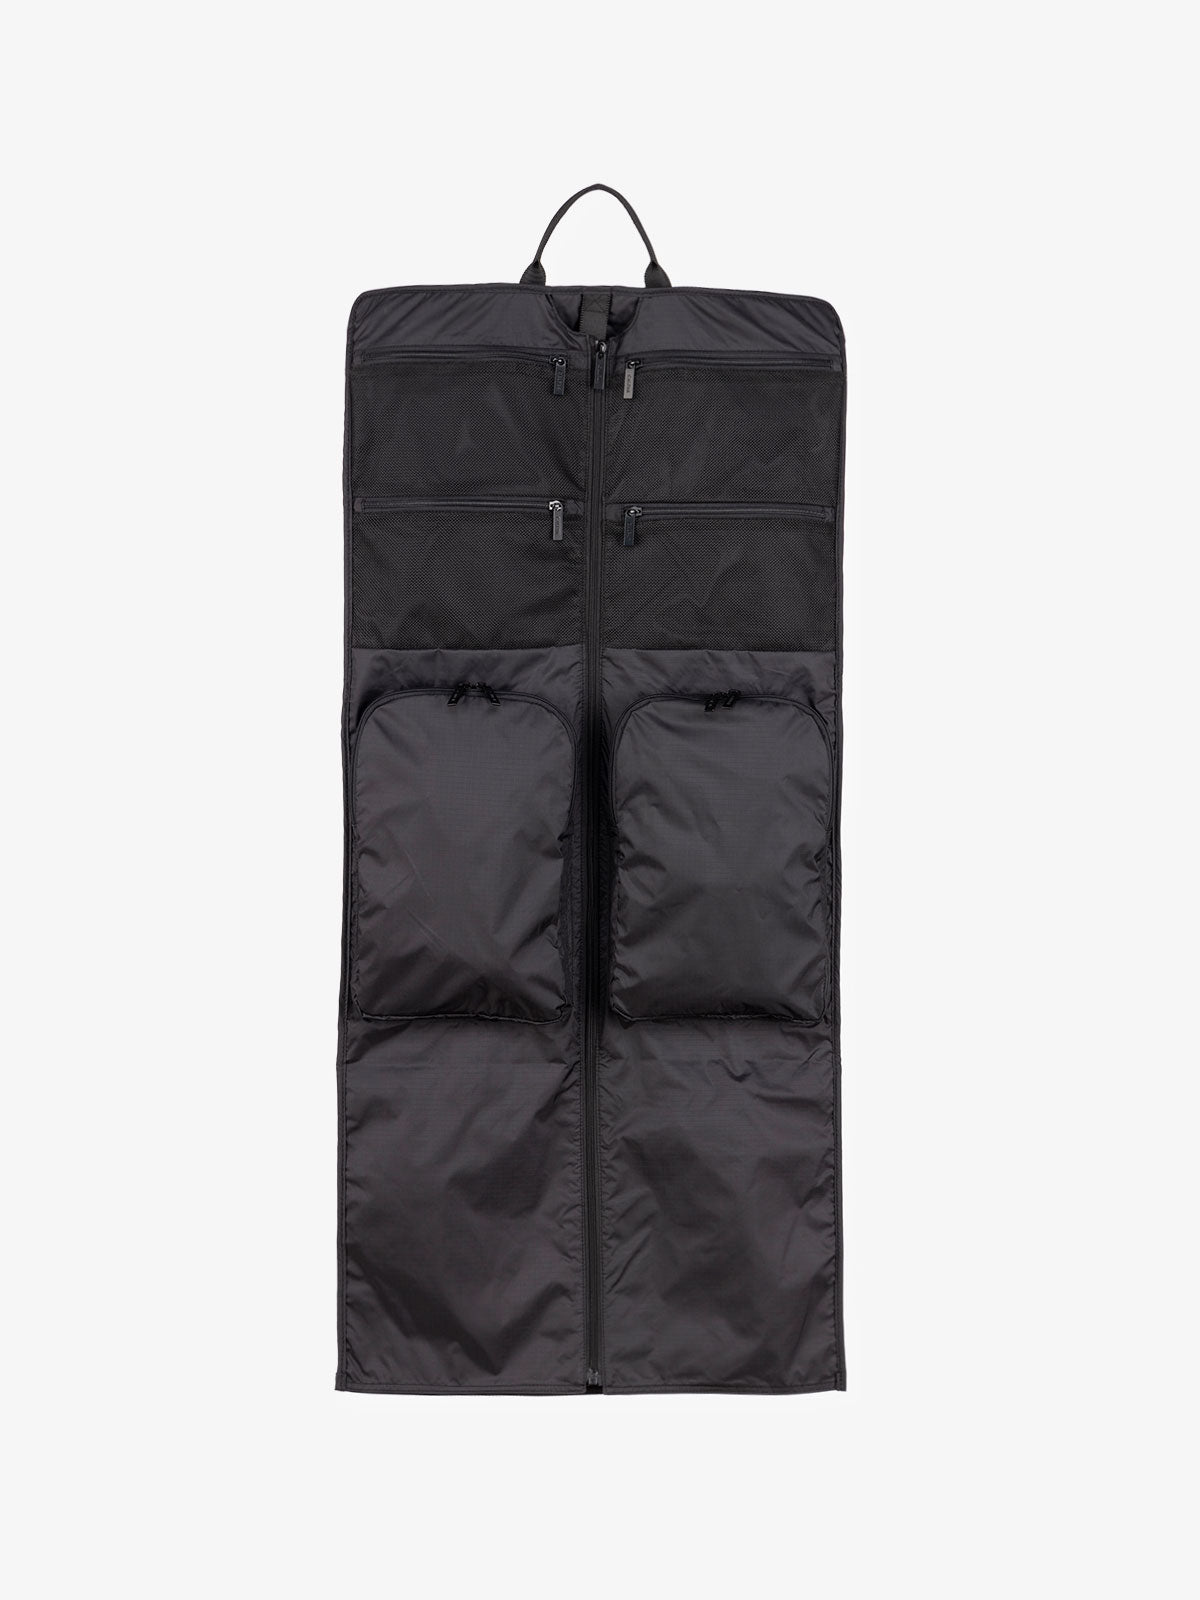 small garment bag with compartments in black